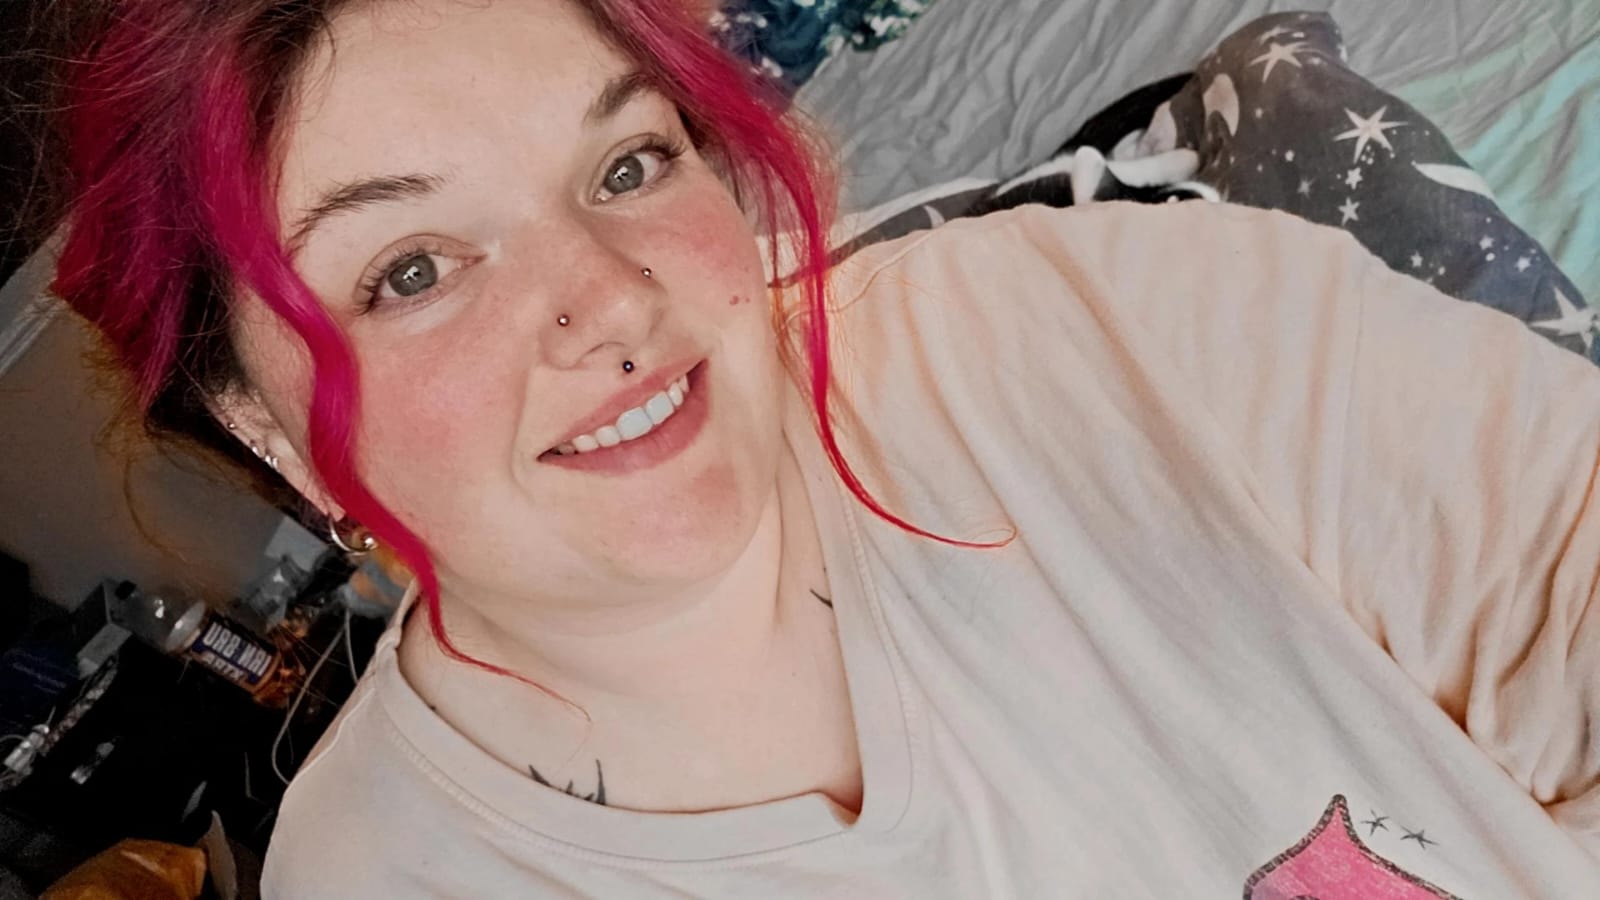 A photo of a woman with pink hair. She's smiling.